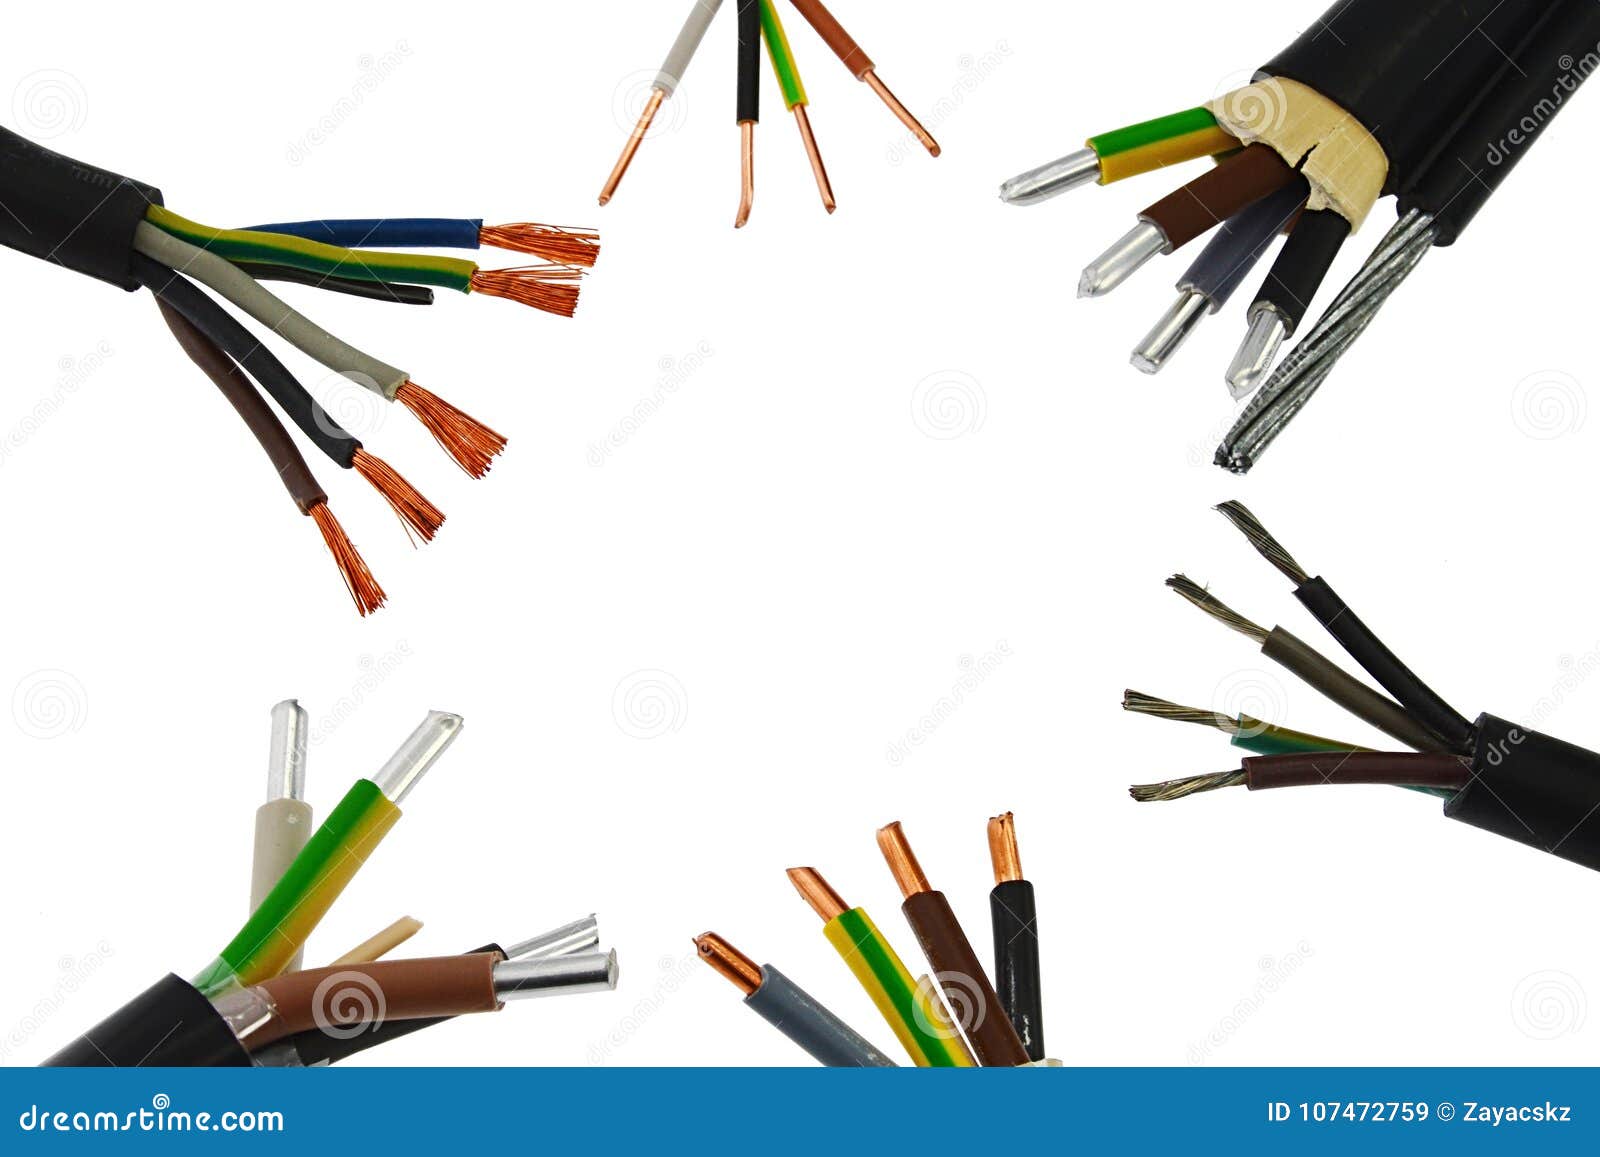 copper and aluminium power electric cable assemblies endings gathered in circle, white background